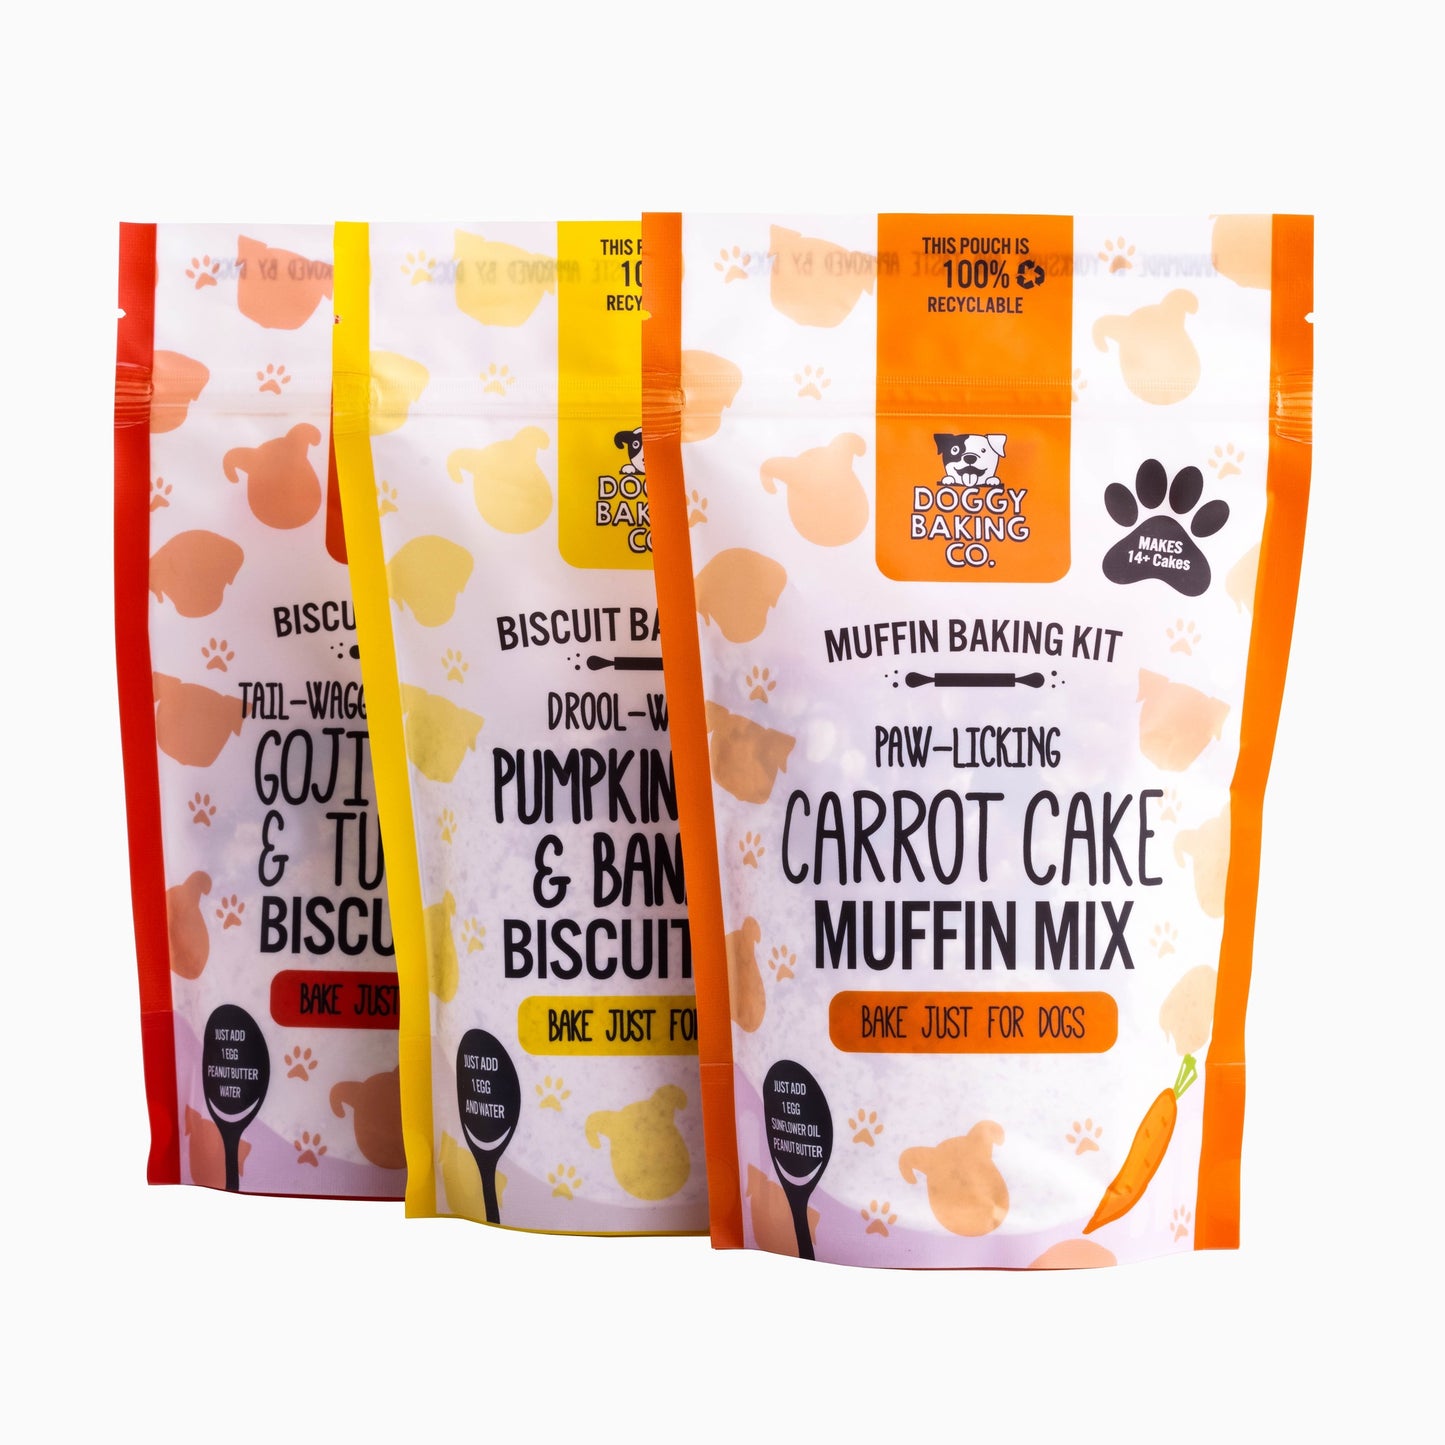 Trio Doggy Baking Pouches - Doggy Baking Co by The Bottled Baking Co